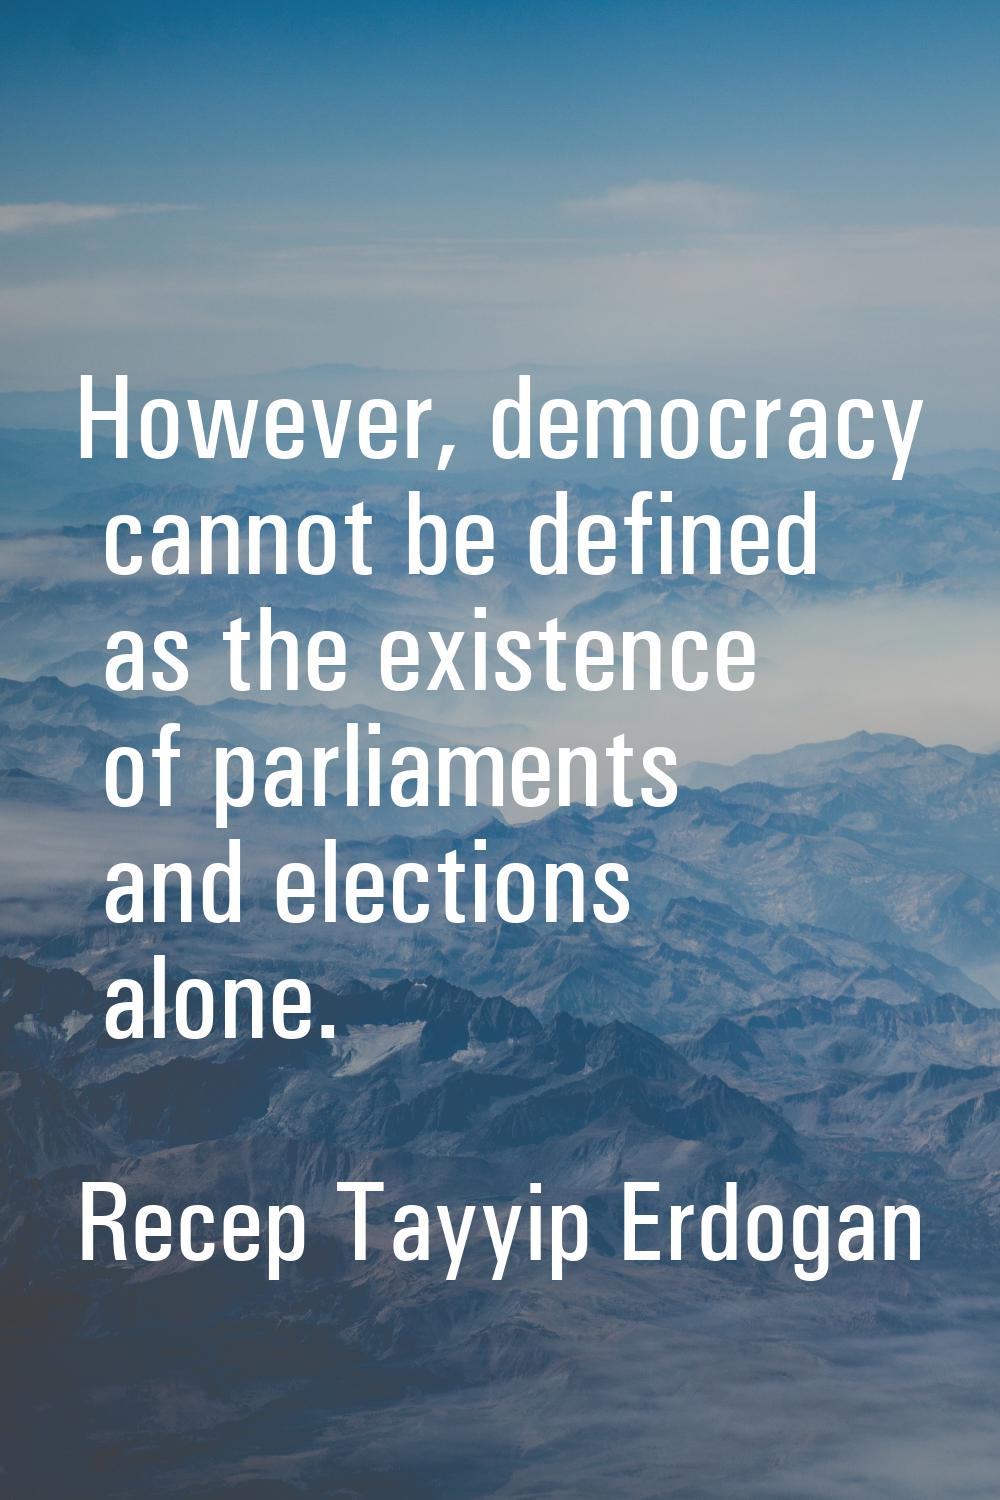 However, democracy cannot be defined as the existence of parliaments and elections alone.